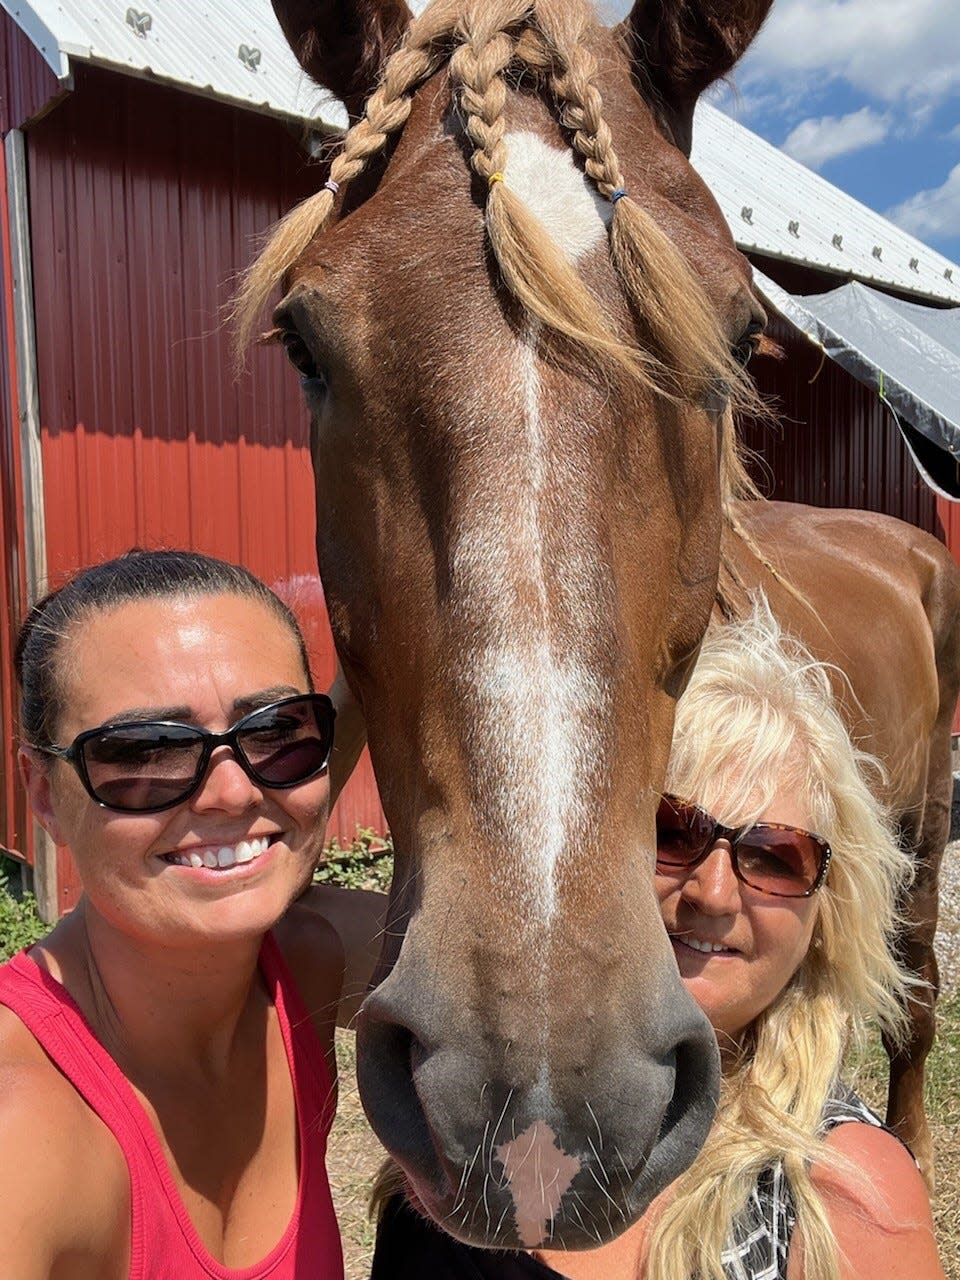 Connie Greenawalt and Angela Higinbotham pose for a photo with a dolled-up Big John at Central Pa. Horse Rescue. The 1,800-pound draft horse died last summer.